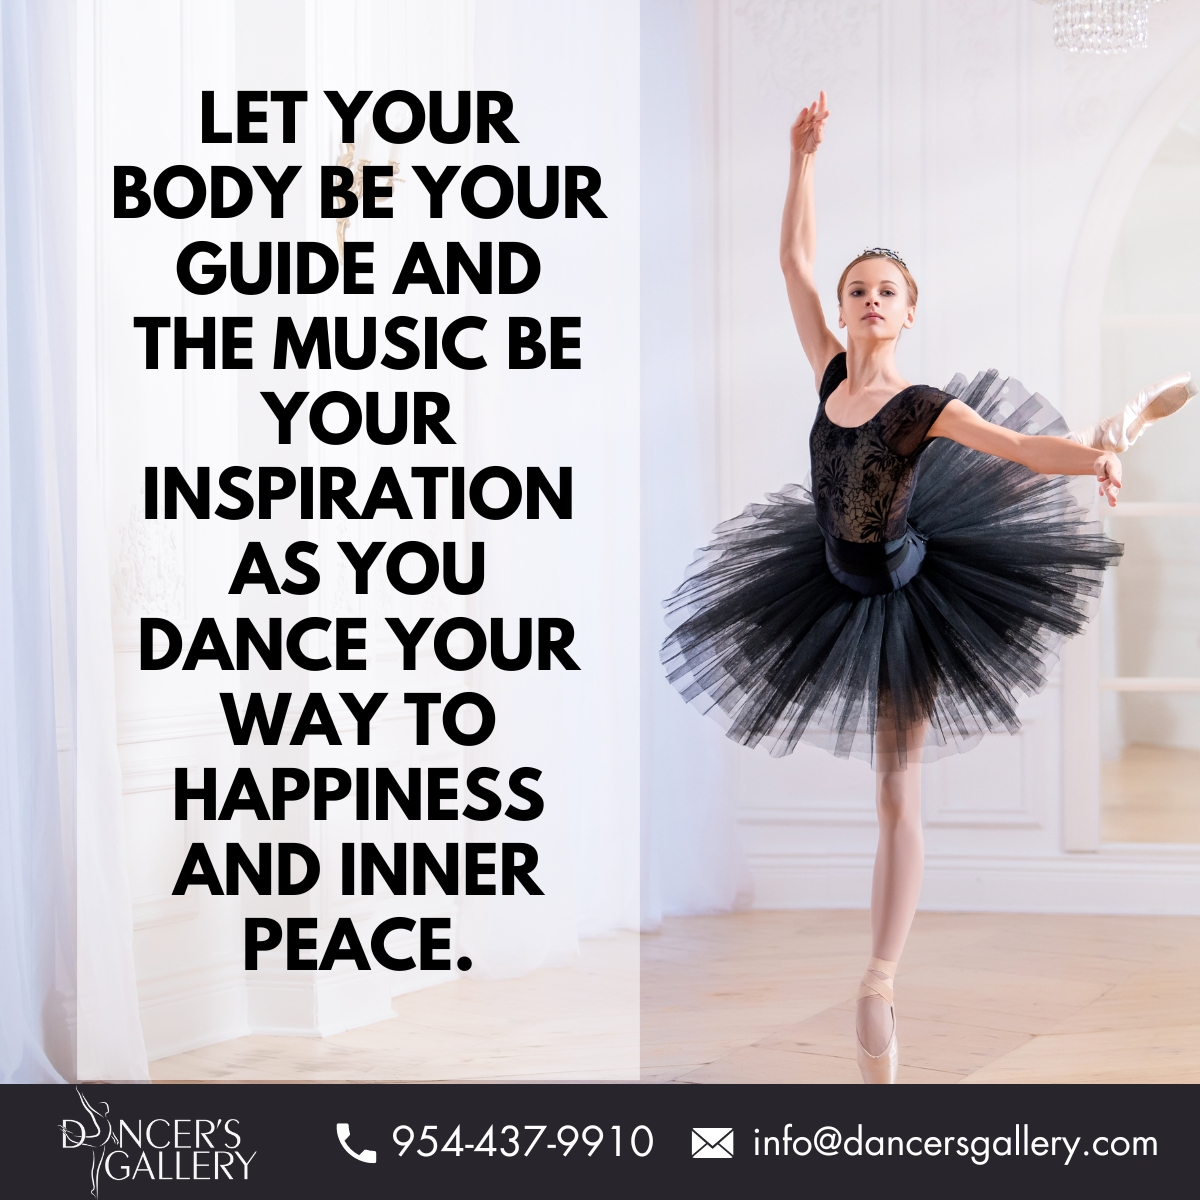 Let your body be your guide and the music be your inspiration as you dance your way to happiness and inner peace.

#quoteoftheday #dancestudiomiami #danceclasses #dancelover #dancelove #dancegoals  #miamidanceclasses #coopercitydancestudio #dancestudiocoopercity #davieflorida